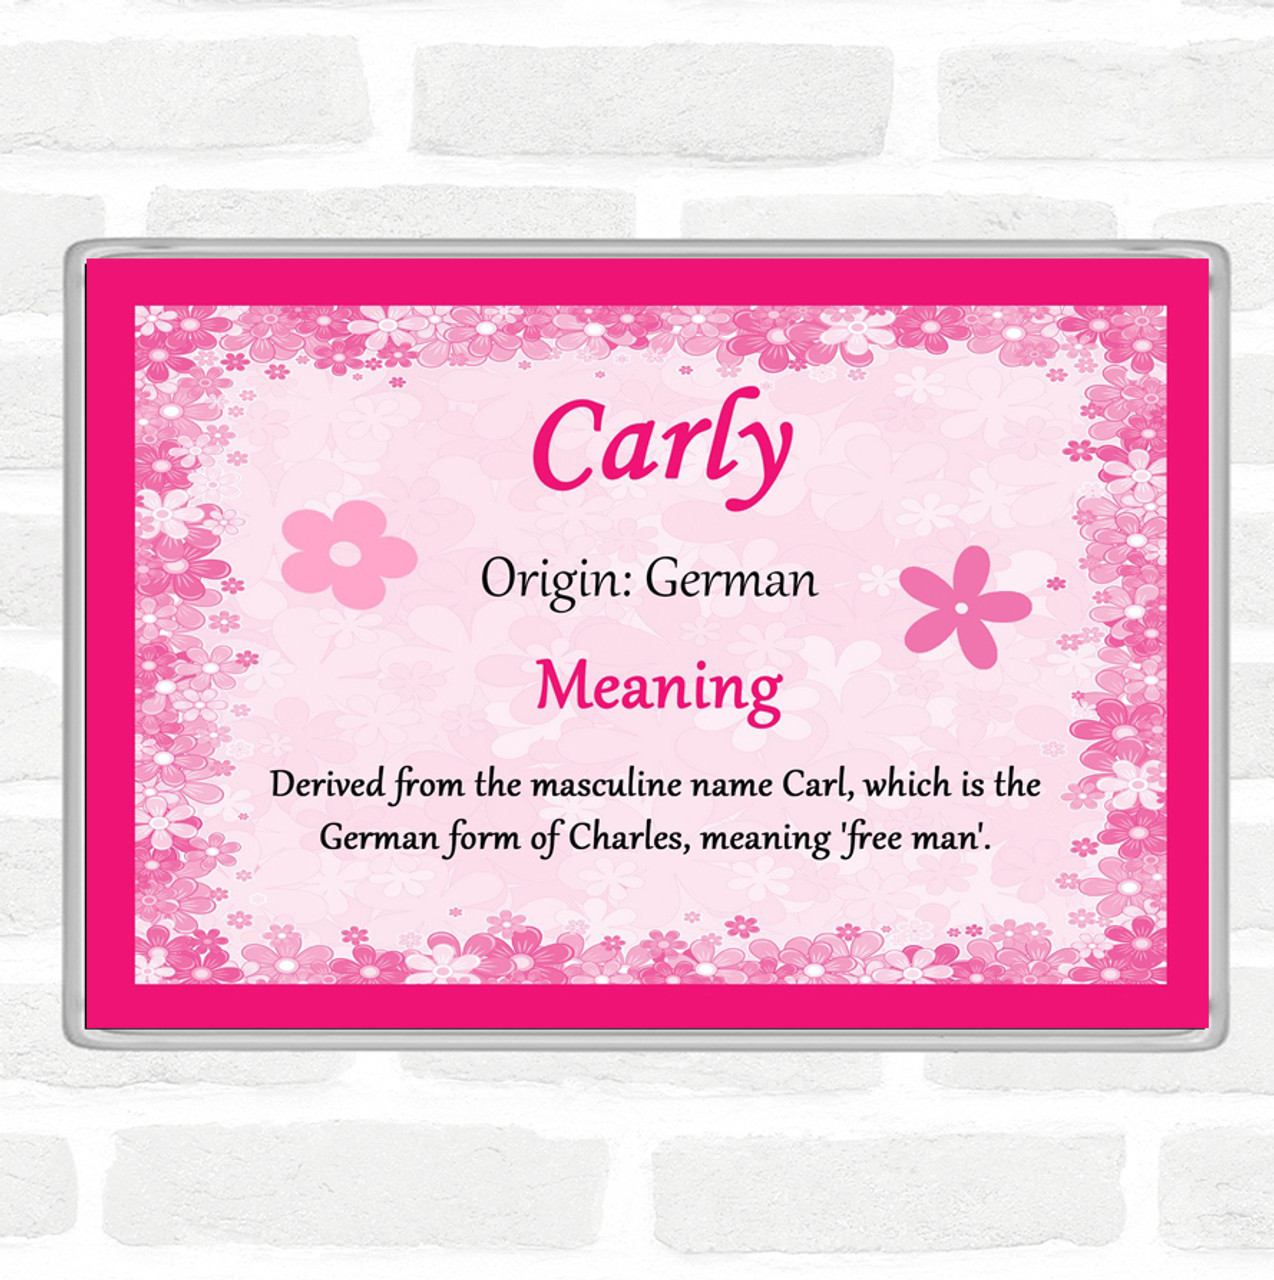 Carly Name Meaning & Origin